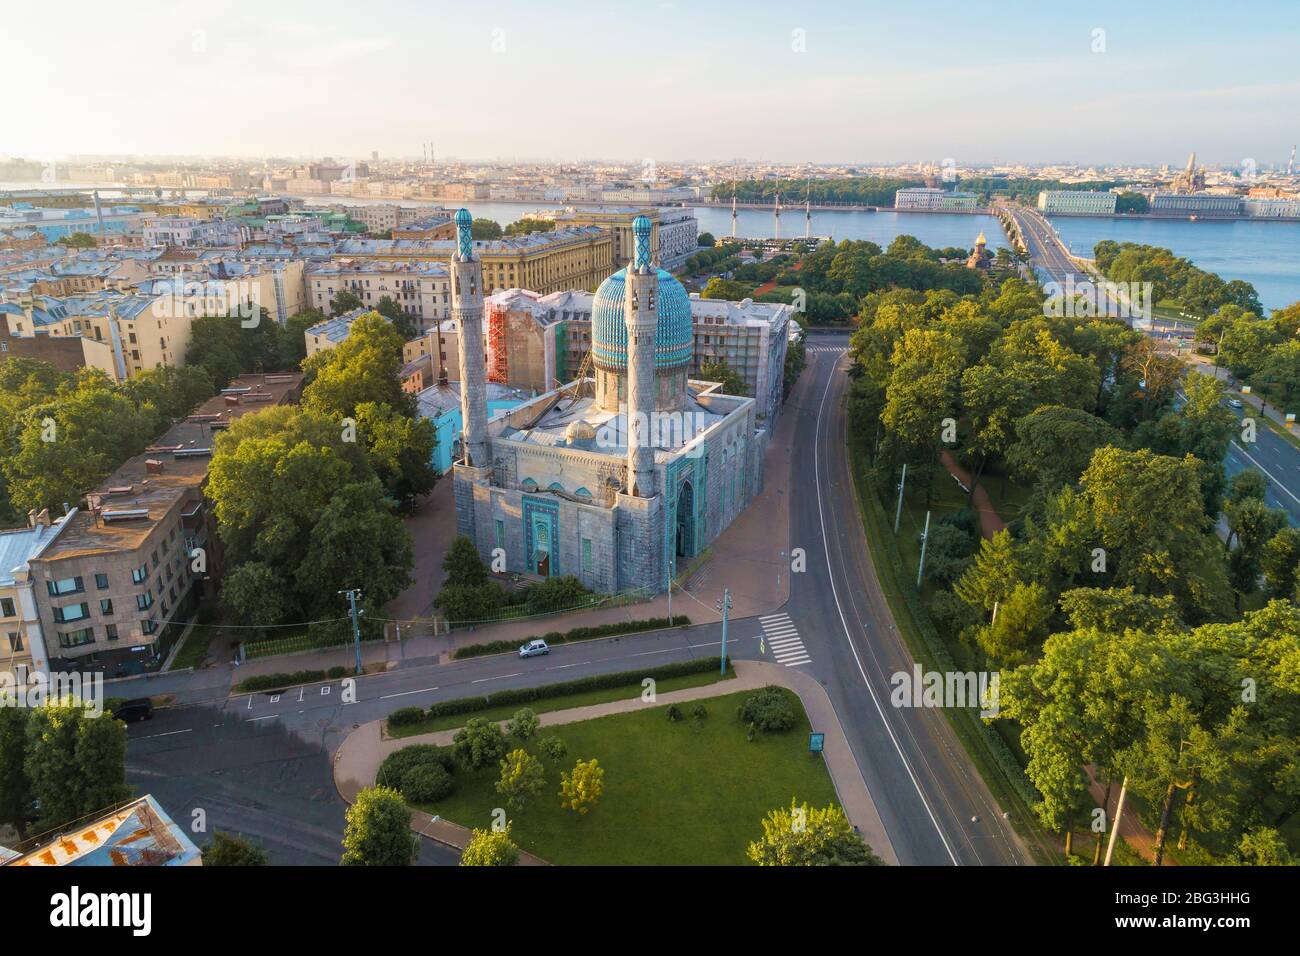 The building of an old mosque in the cityscape on a July morning (aerial photography). Saint-Petersburg, Russia Stock Photo